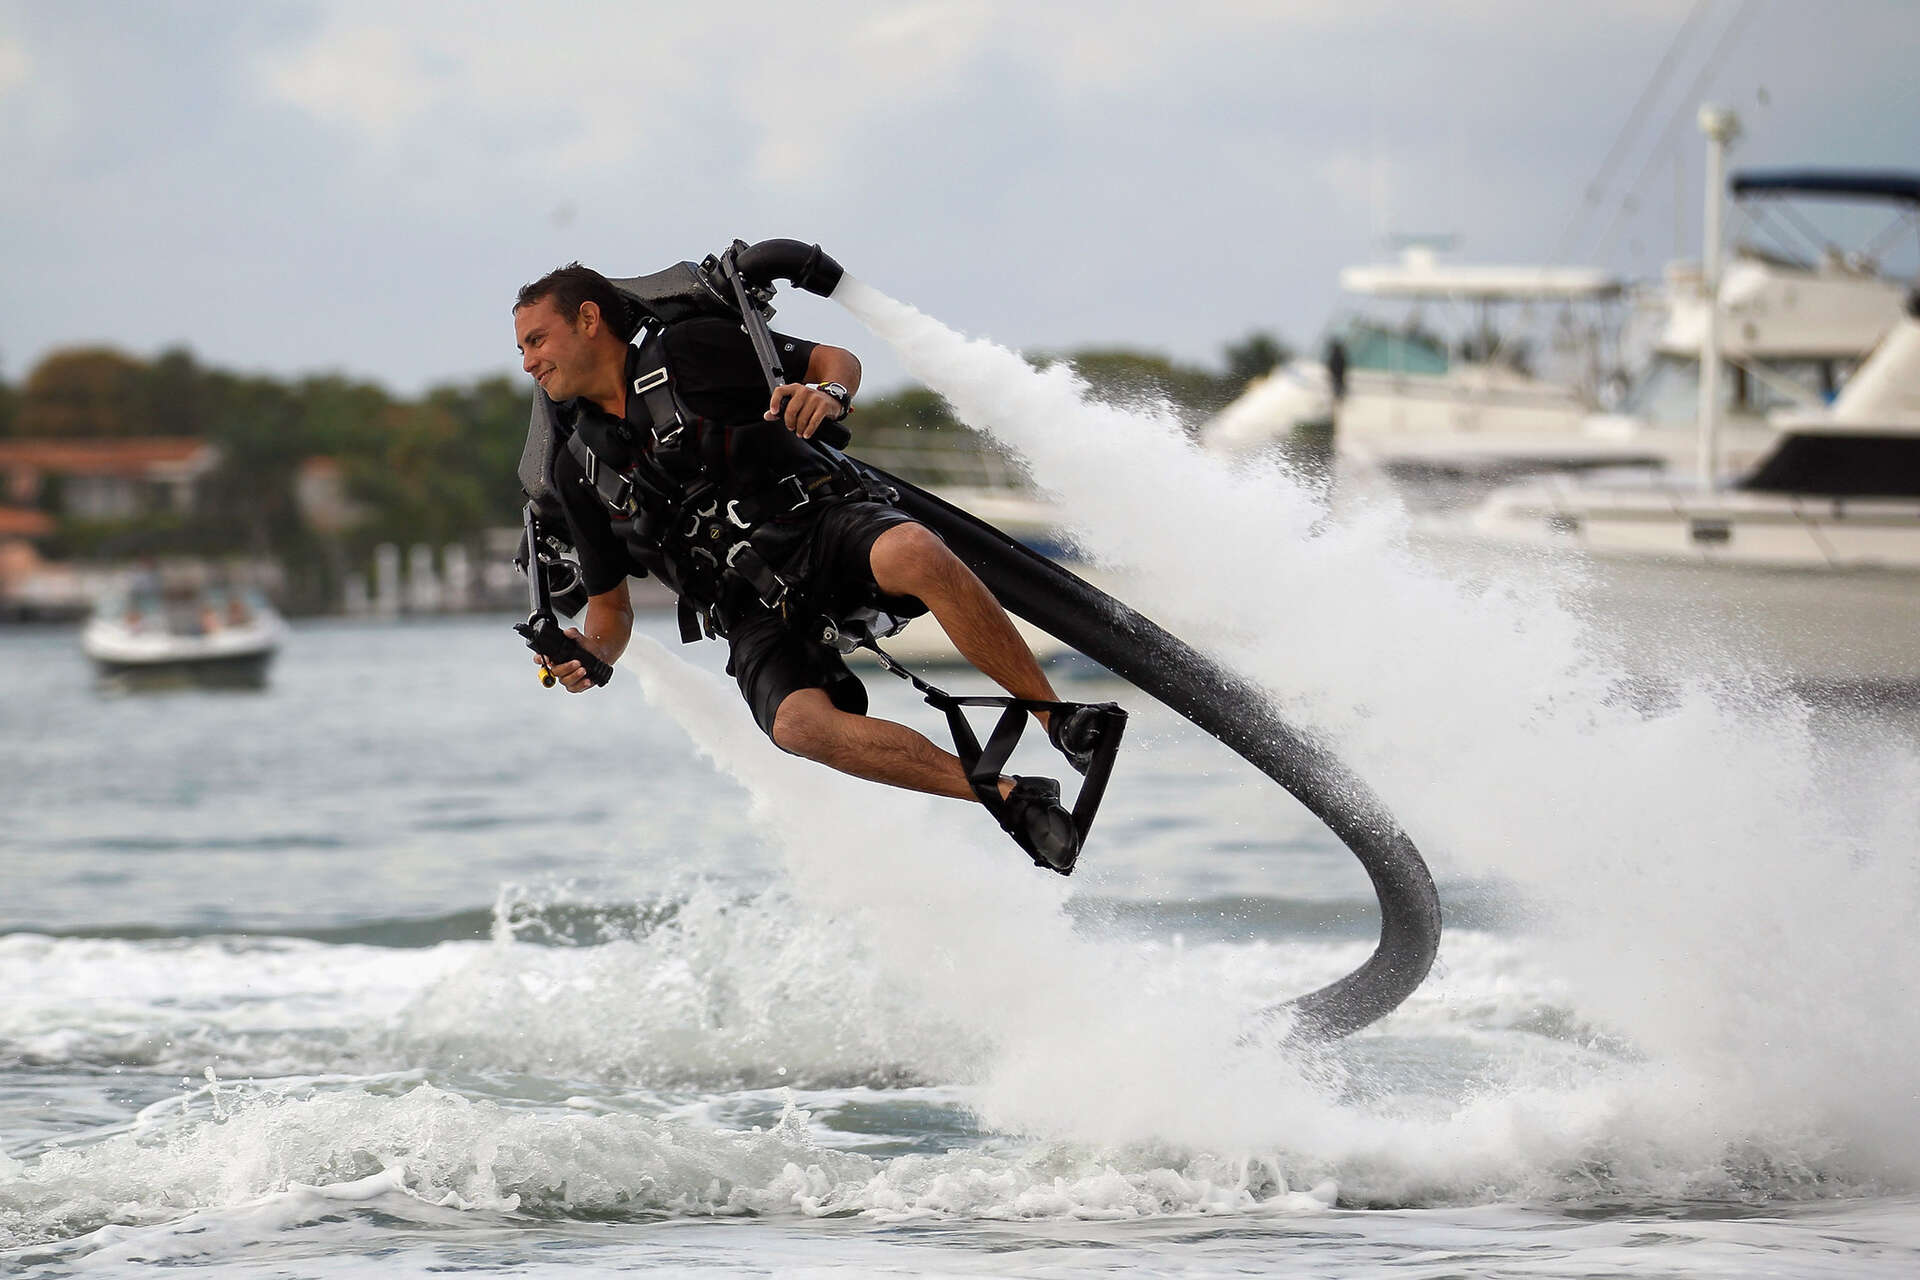 Jetpack - Things to do in Southampton